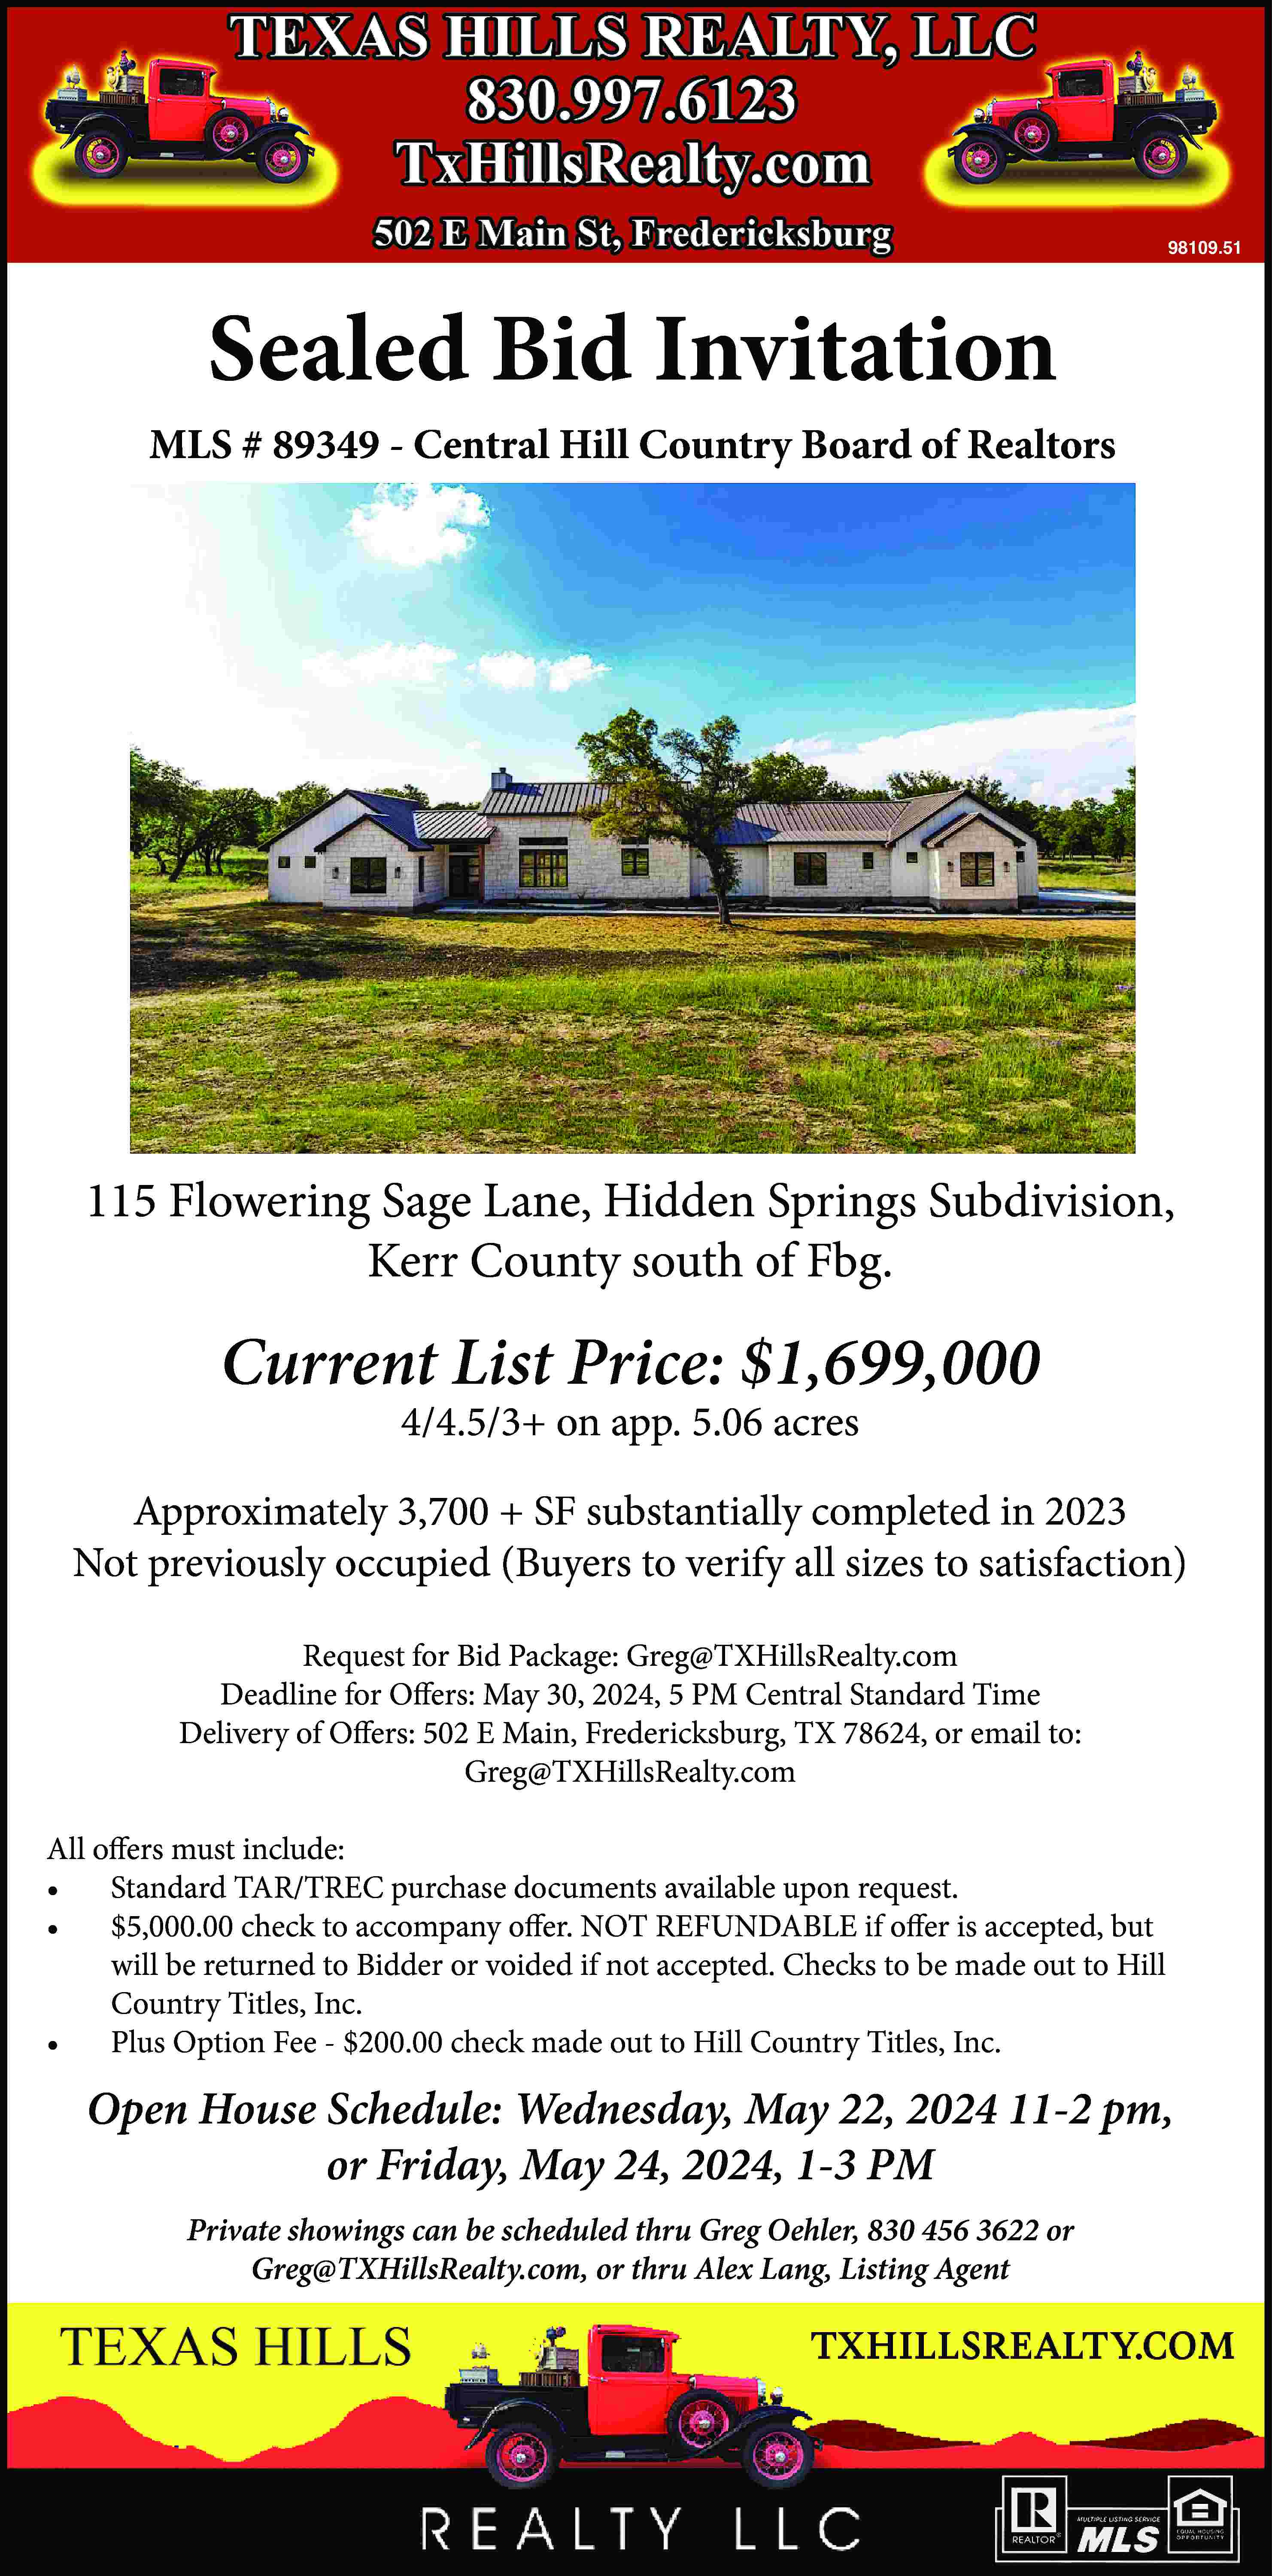 98109.51 Sealed Bid Invitation MLS  98109.51 Sealed Bid Invitation MLS # 89349 - Central Hill Country Board of Realtors 115 Flowering Sage Lane, Hidden Springs Subdivision, Kerr County south of Fbg. Current List Price: $1,699,000 4/4.5/3+ on app. 5.06 acres Approximately 3,700 + SF substantially completed in 2023 Not previously occupied (Buyers to verify all sizes to satisfaction) Request for Bid Package: Greg@TXHillsRealty.com Deadline for Offers: May 30, 2024, 5 PM Central Standard Time Delivery of Offers: 502 E Main, Fredericksburg, TX 78624, or email to: Greg@TXHillsRealty.com All offers must include: •	 Standard TAR/TREC purchase documents available upon request. •	 $5,000.00 check to accompany offer. NOT REFUNDABLE if offer is accepted, but will be returned to Bidder or voided if not accepted. Checks to be made out to Hill Country Titles, Inc. •	 Plus Option Fee - $200.00 check made out to Hill Country Titles, Inc. Open House Schedule: Wednesday, May 22, 2024 11-2 pm, or Friday, May 24, 2024, 1-3 PM Private showings can be scheduled thru Greg Oehler, 830 456 3622 or Greg@TXHillsRealty.com, or thru Alex Lang, Listing Agent